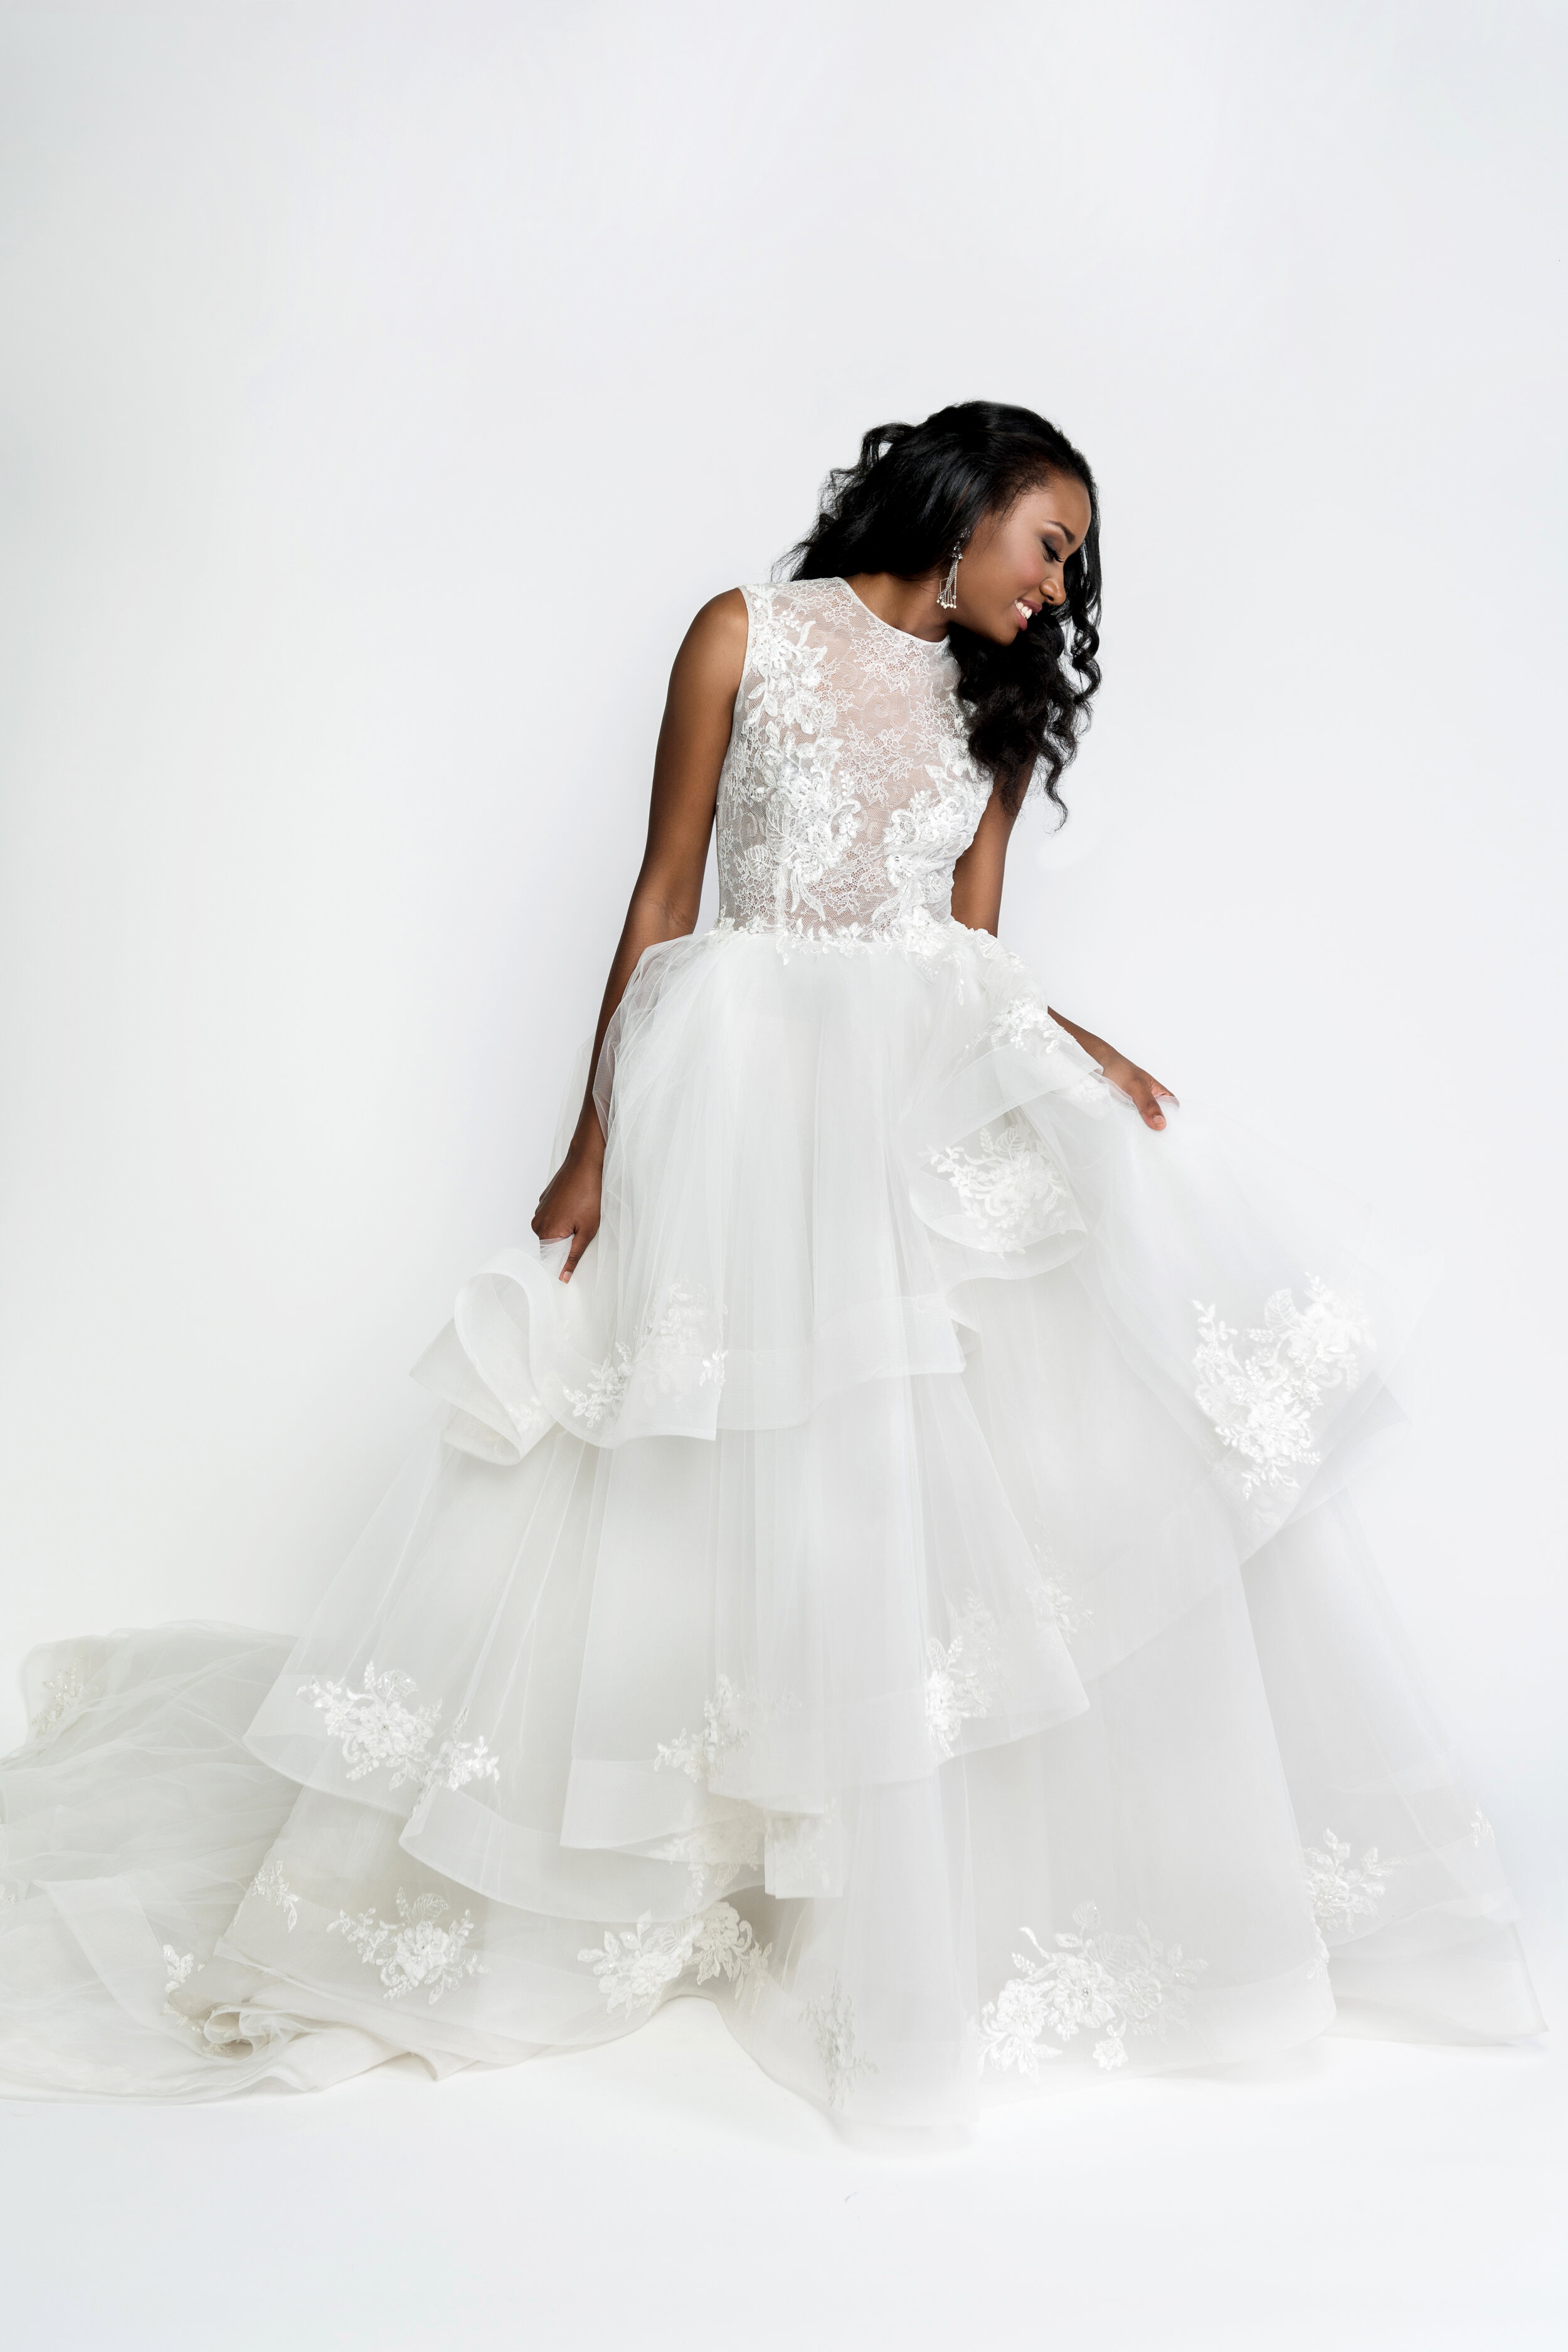 Wedding Dresses Selected for A Winter Park Wedding Venue | The Bridal ...